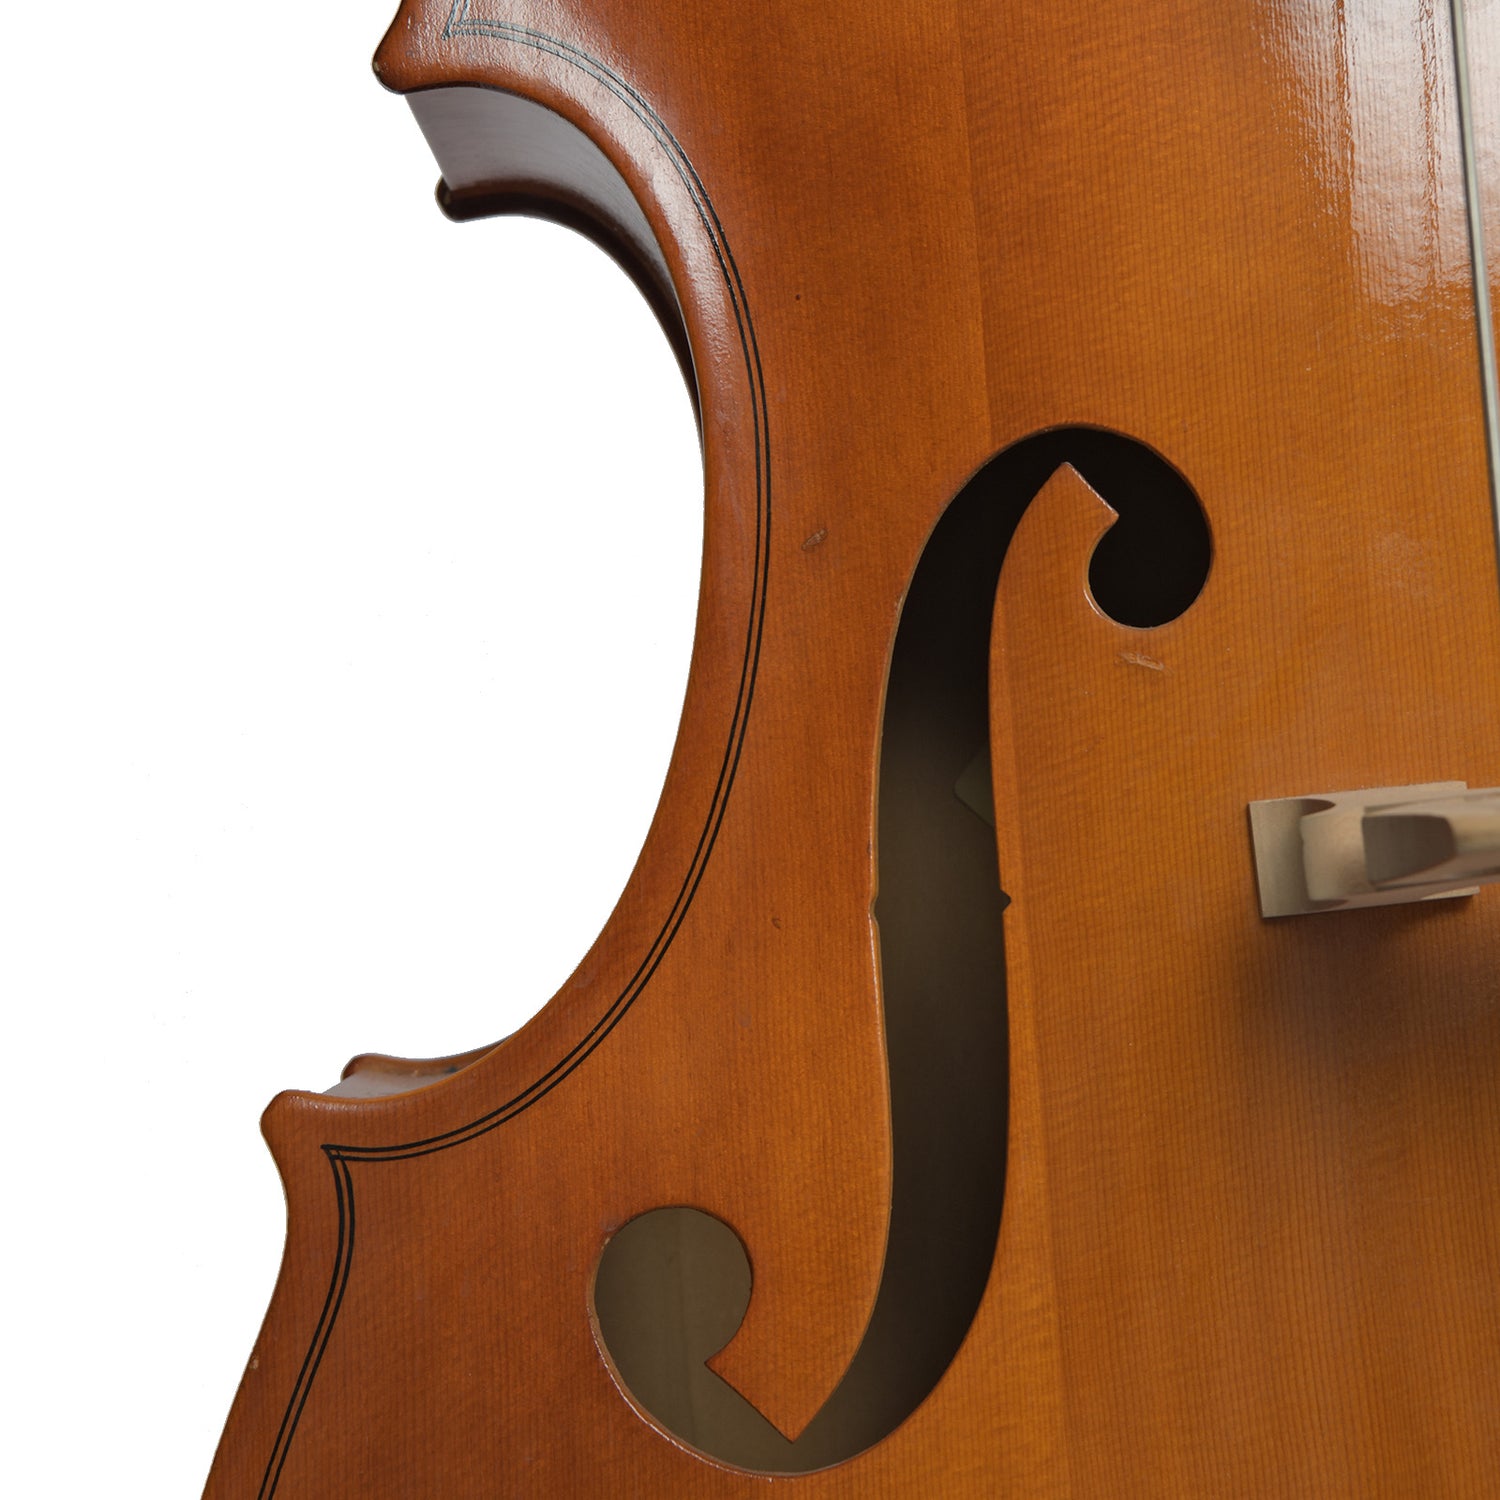 front waist and F-hole of Englehardt M-1 3/4 Upright Bass